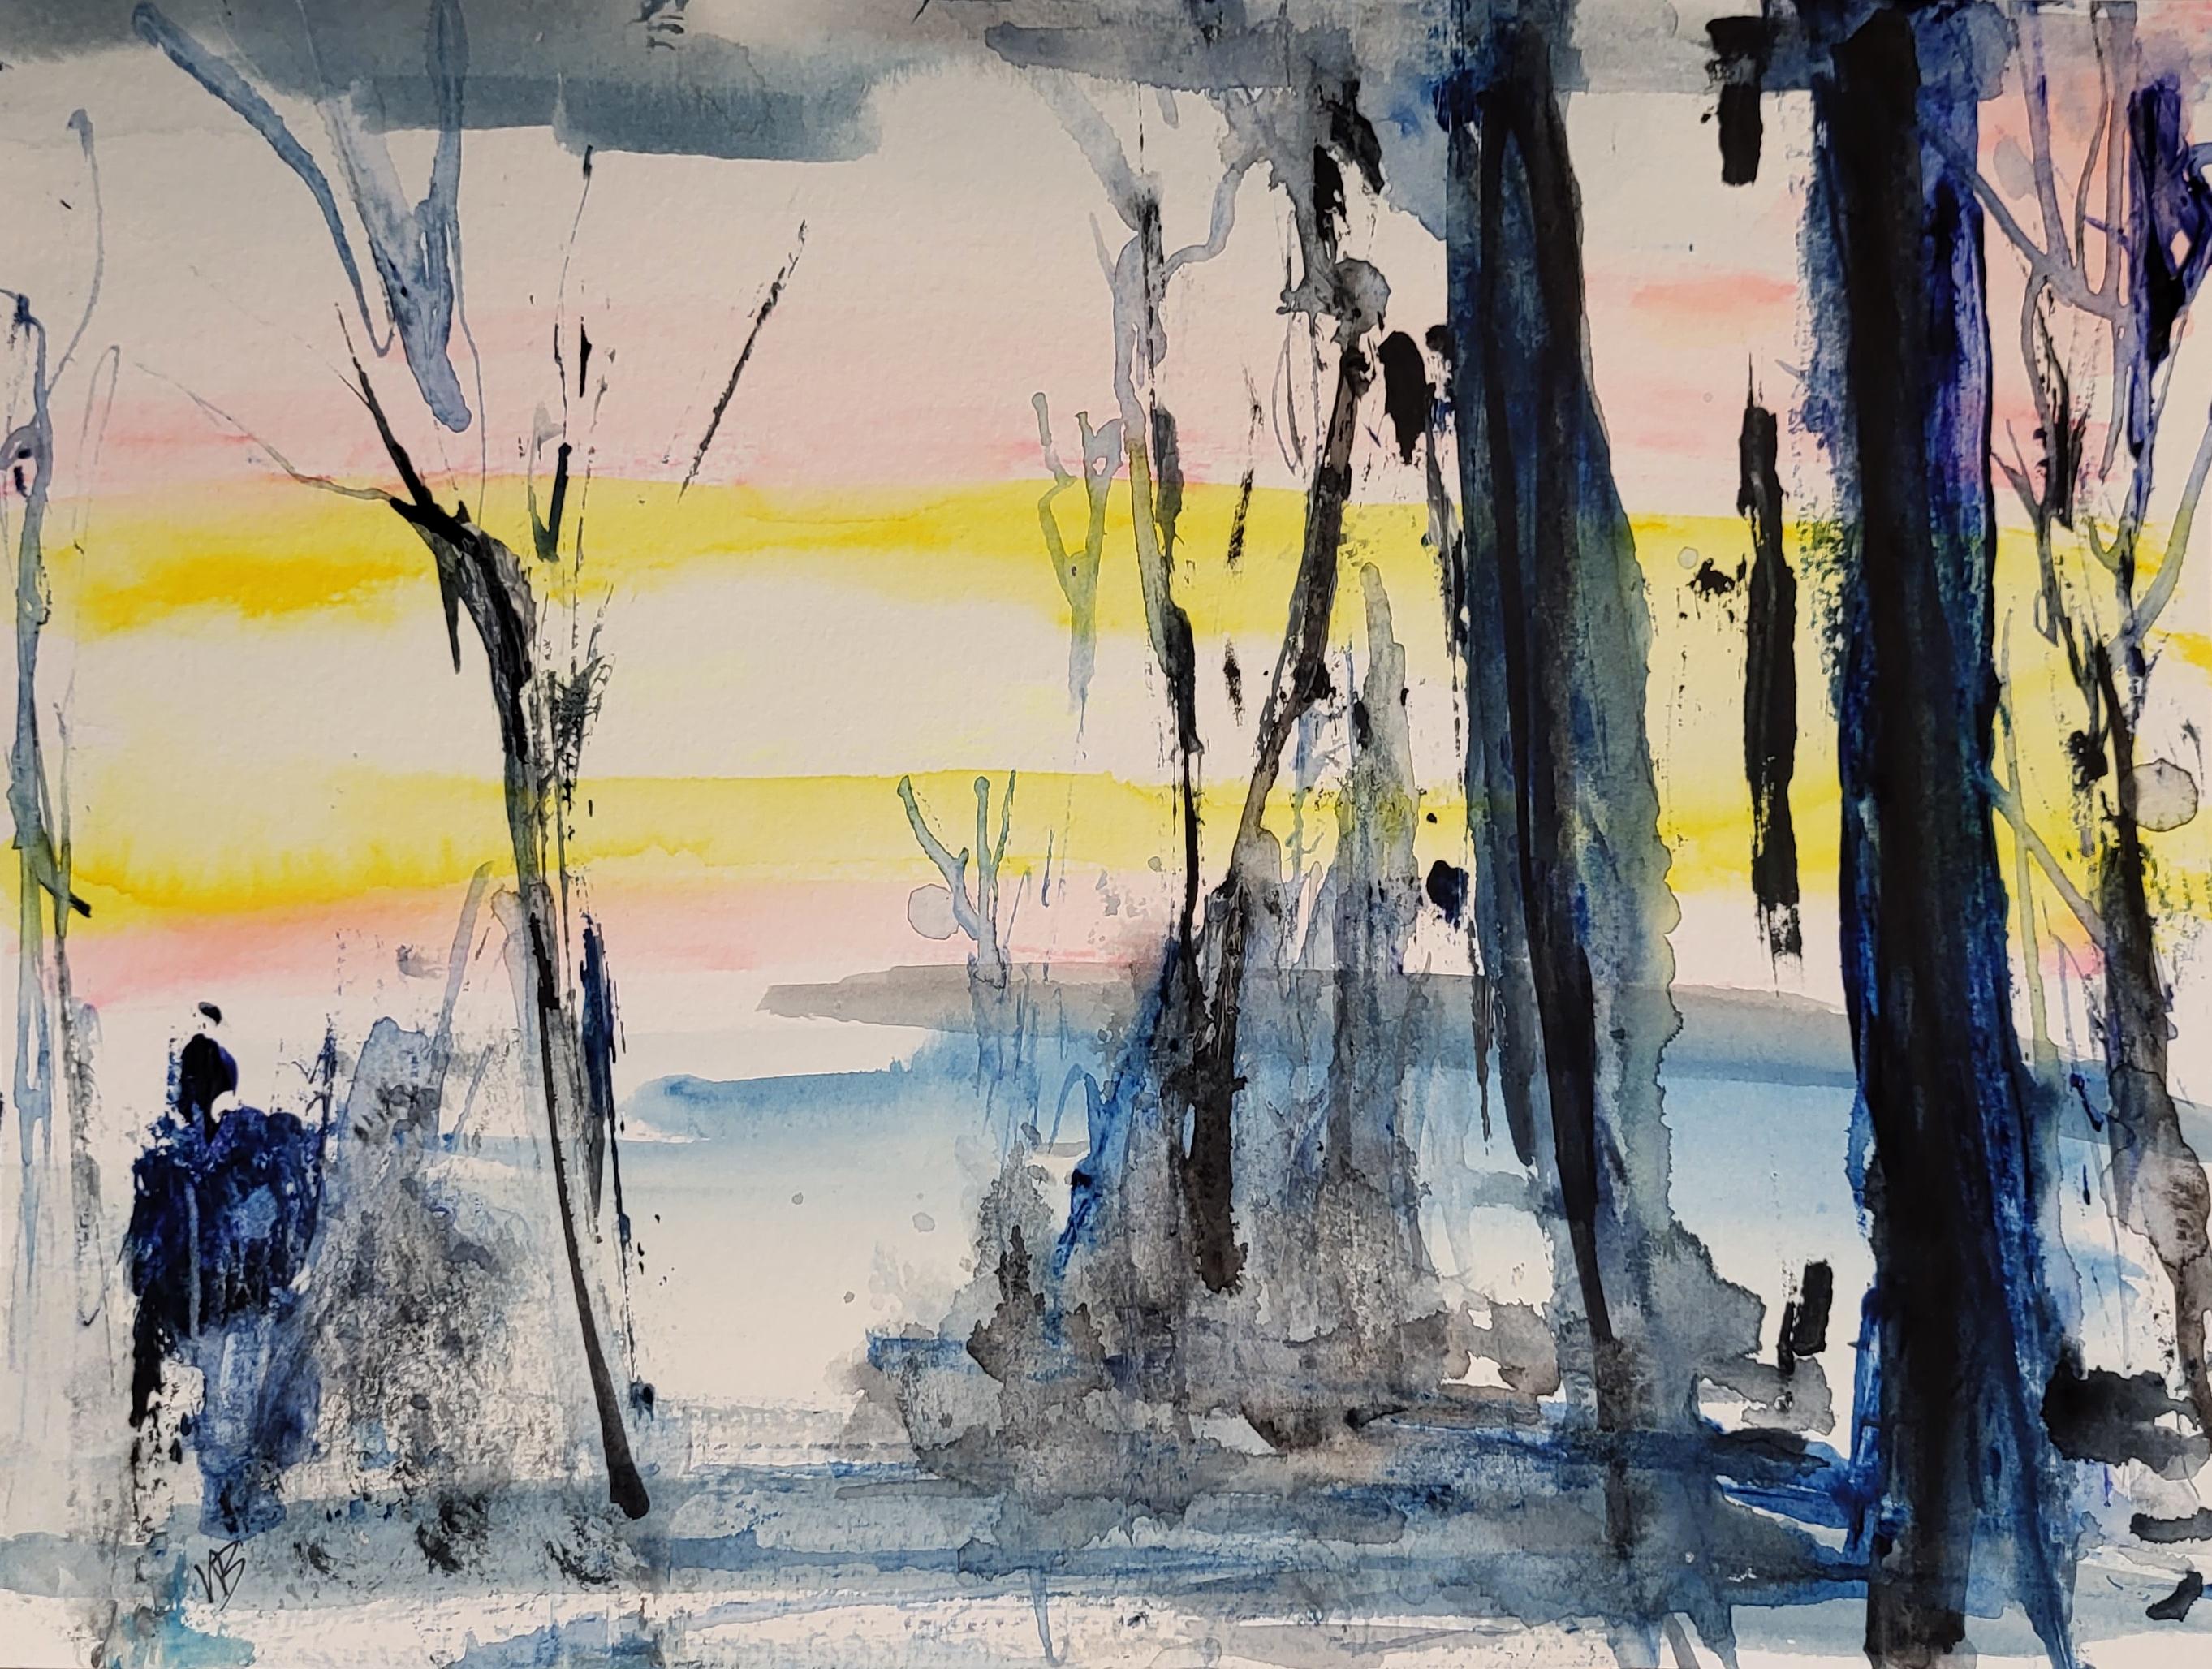 Vian Borchert Abstract Drawing - Sunset by the River -  (Watercolor, Landscape, Sunset painting, landscape